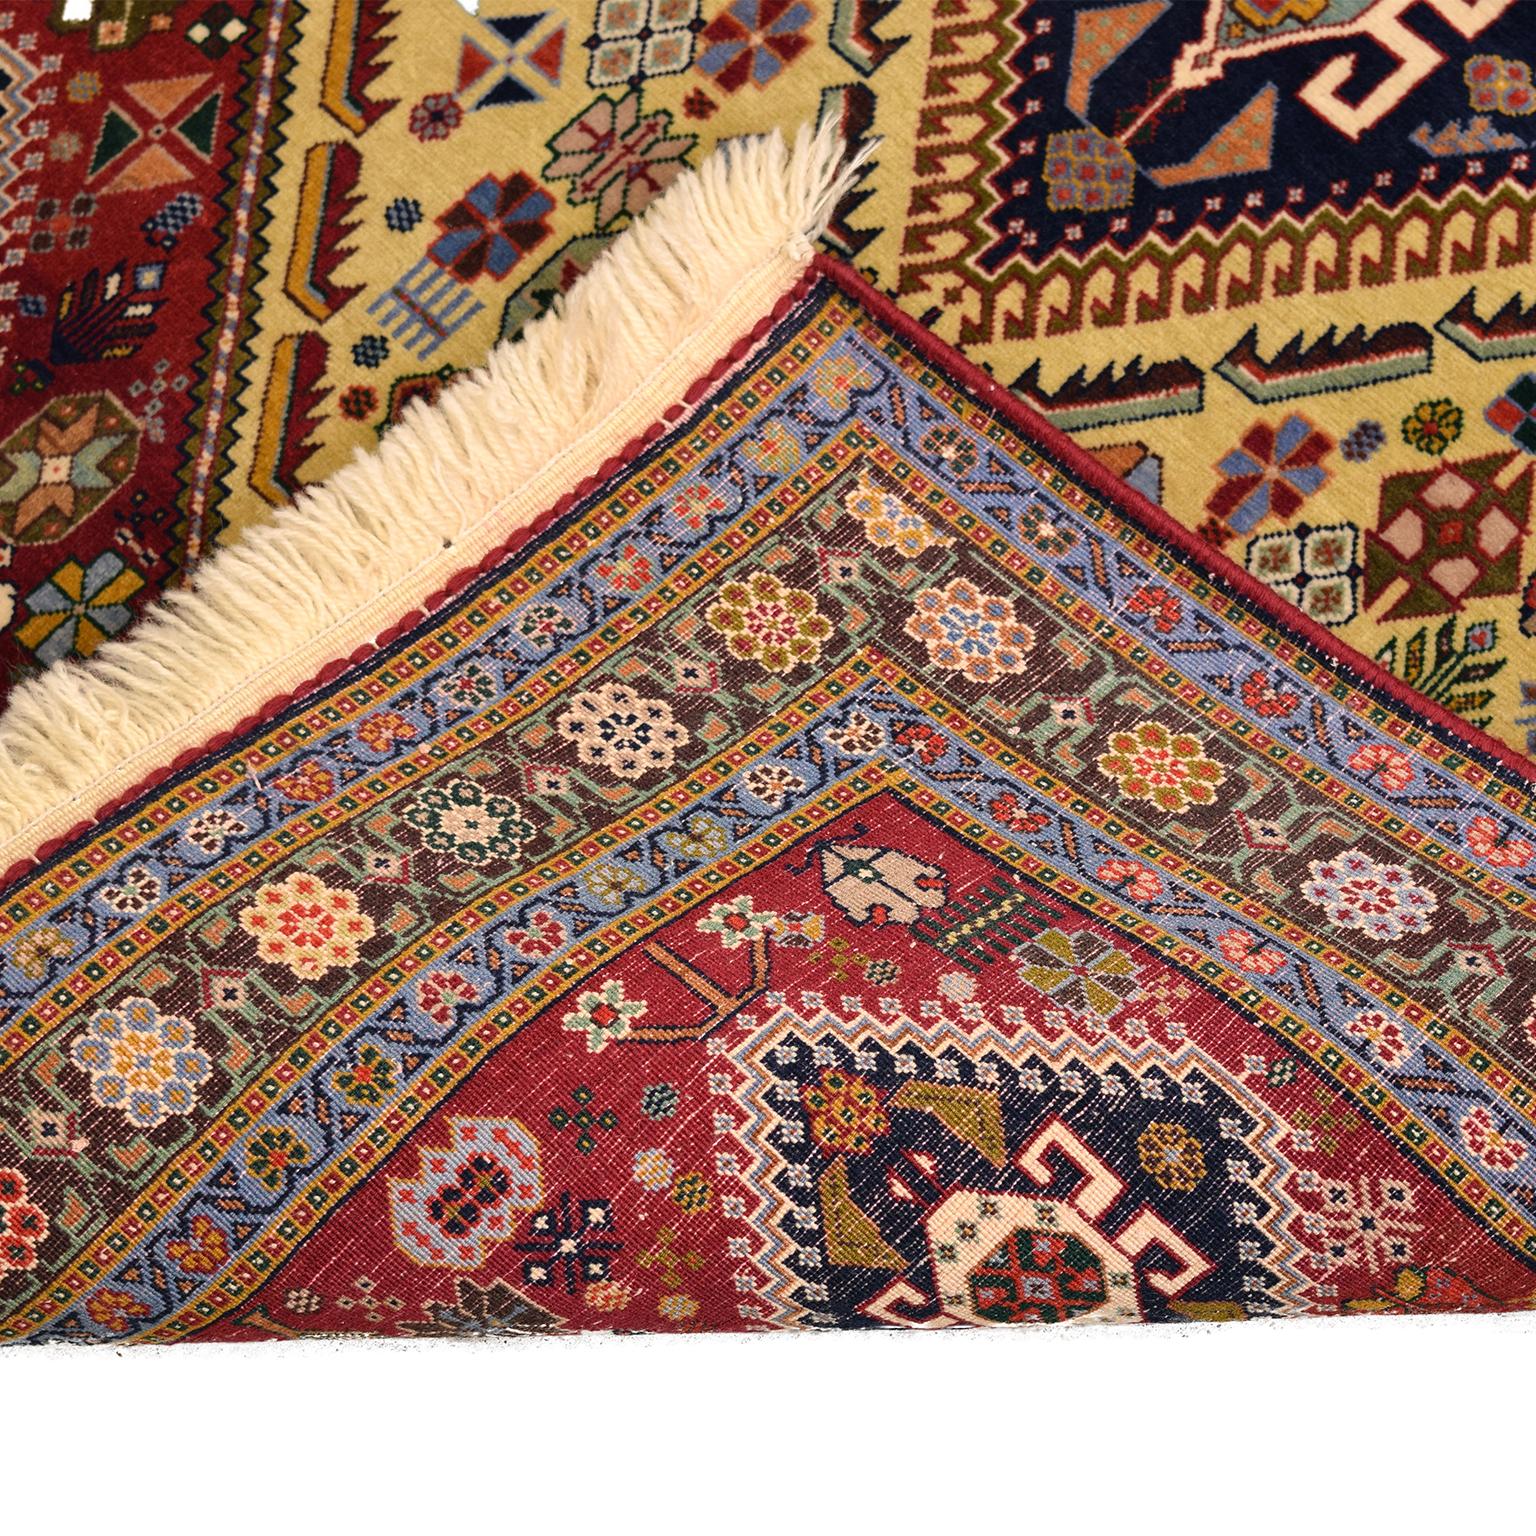 Wool Vintage 1940s Persian Kashkouli Tribal Rug, Red and Yellow, 3' x 5' For Sale